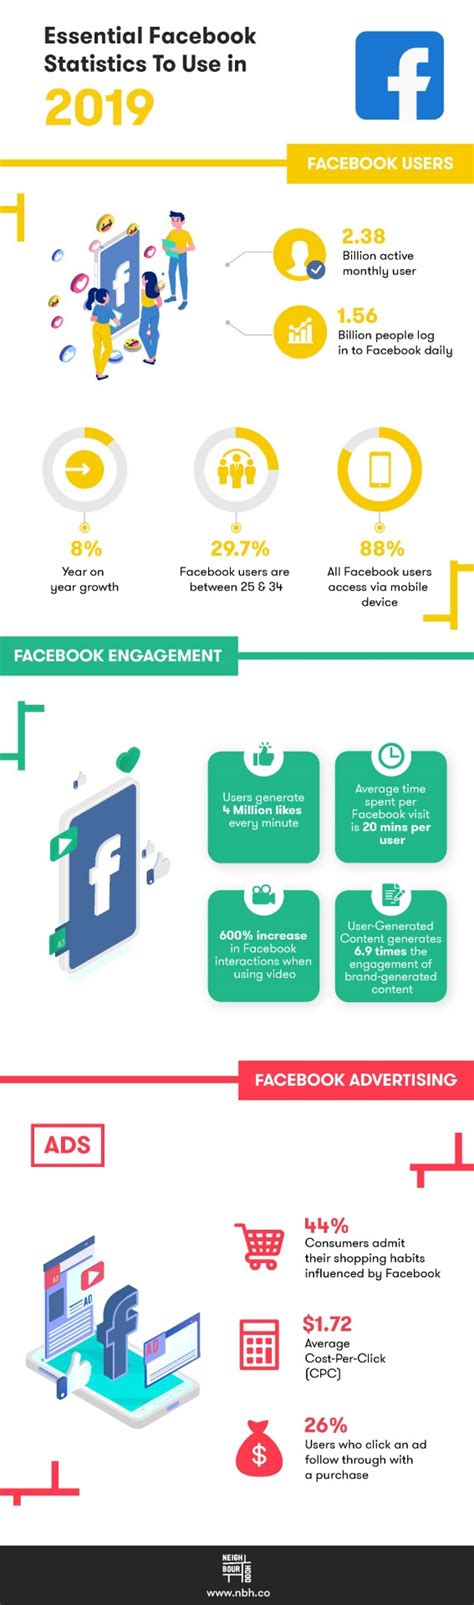 Facebook Stats Every Marketer Should Know In 2021